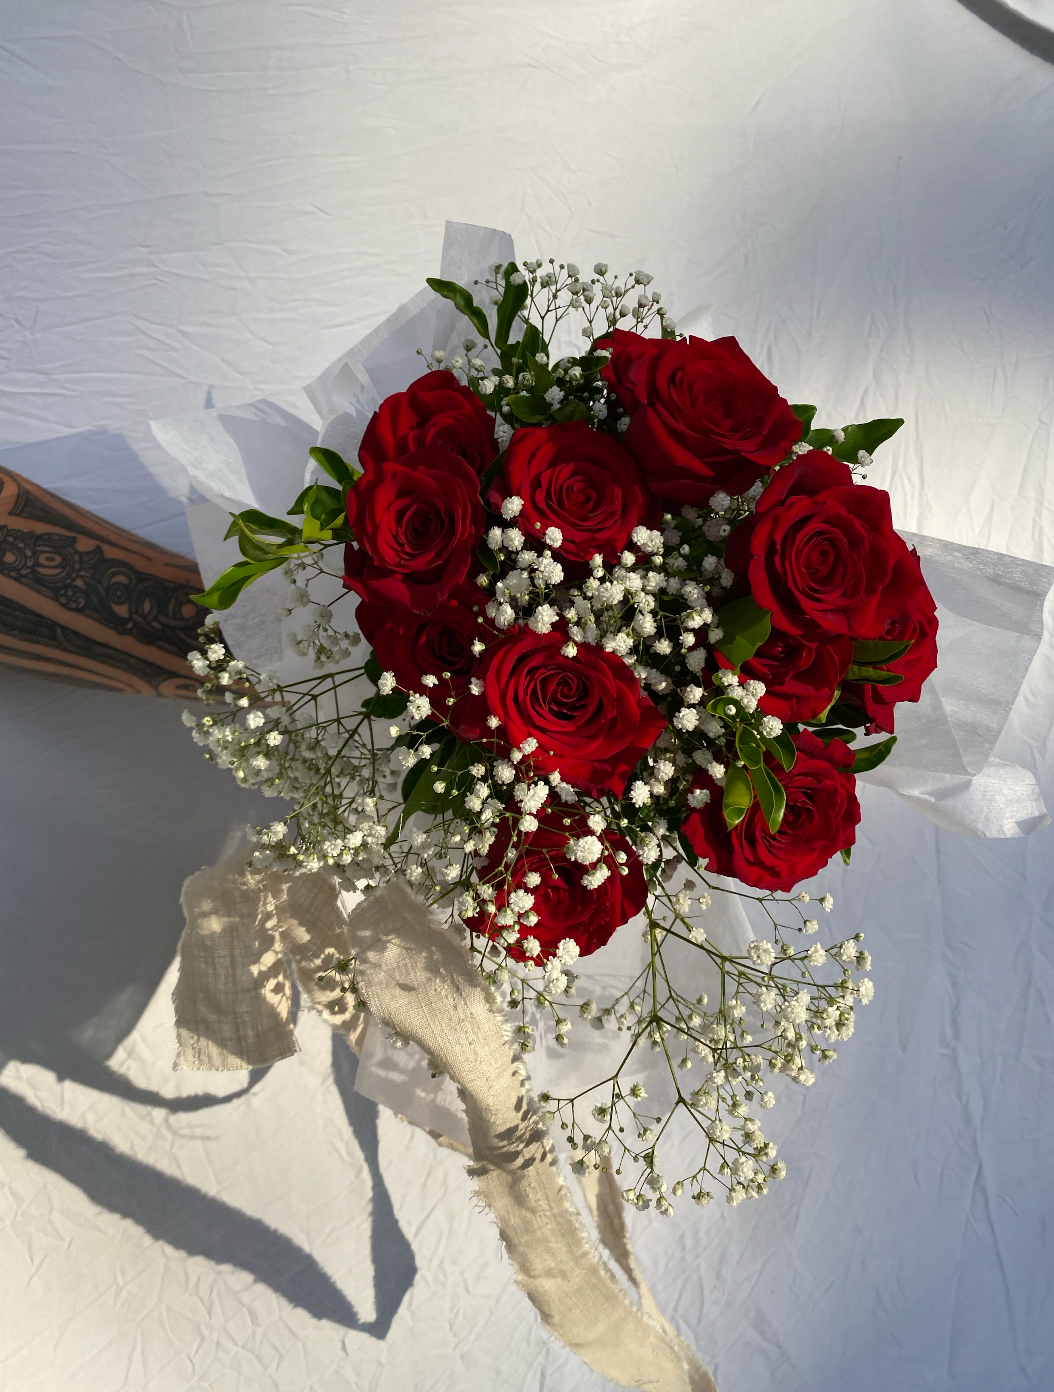 A dozen red roses for our valentines day collection.